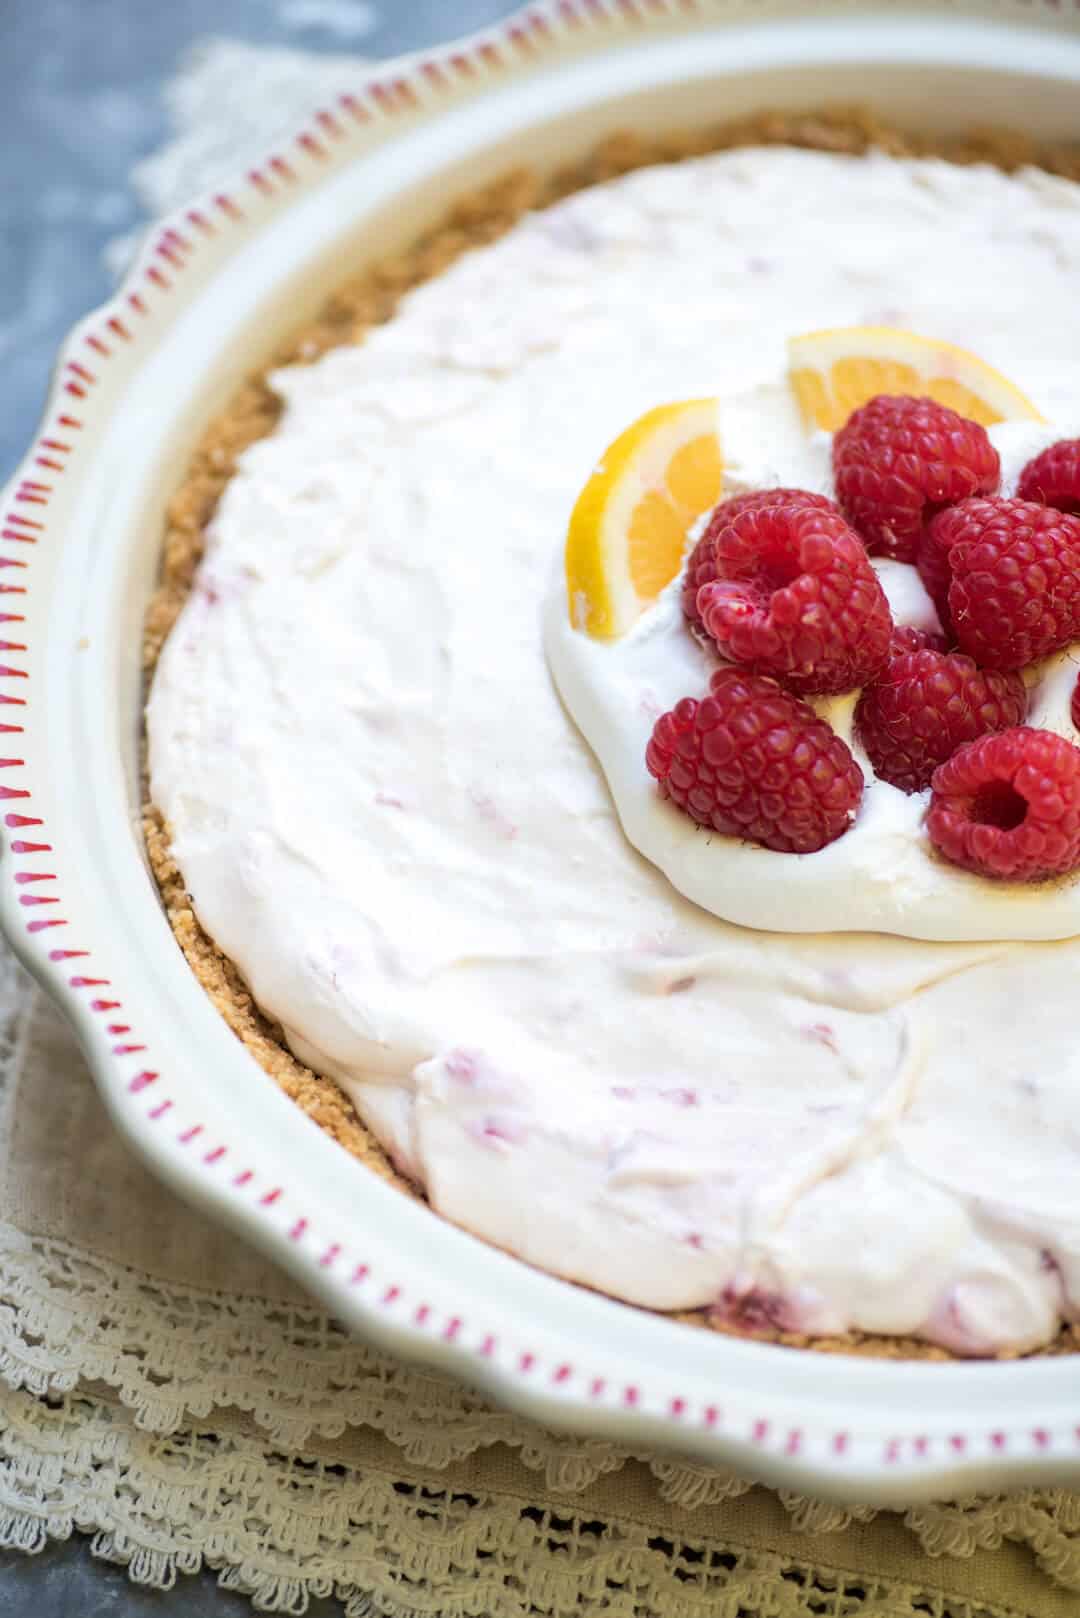 A closeup of the pie in the pie plate decorated with raspberries and lemon slices.